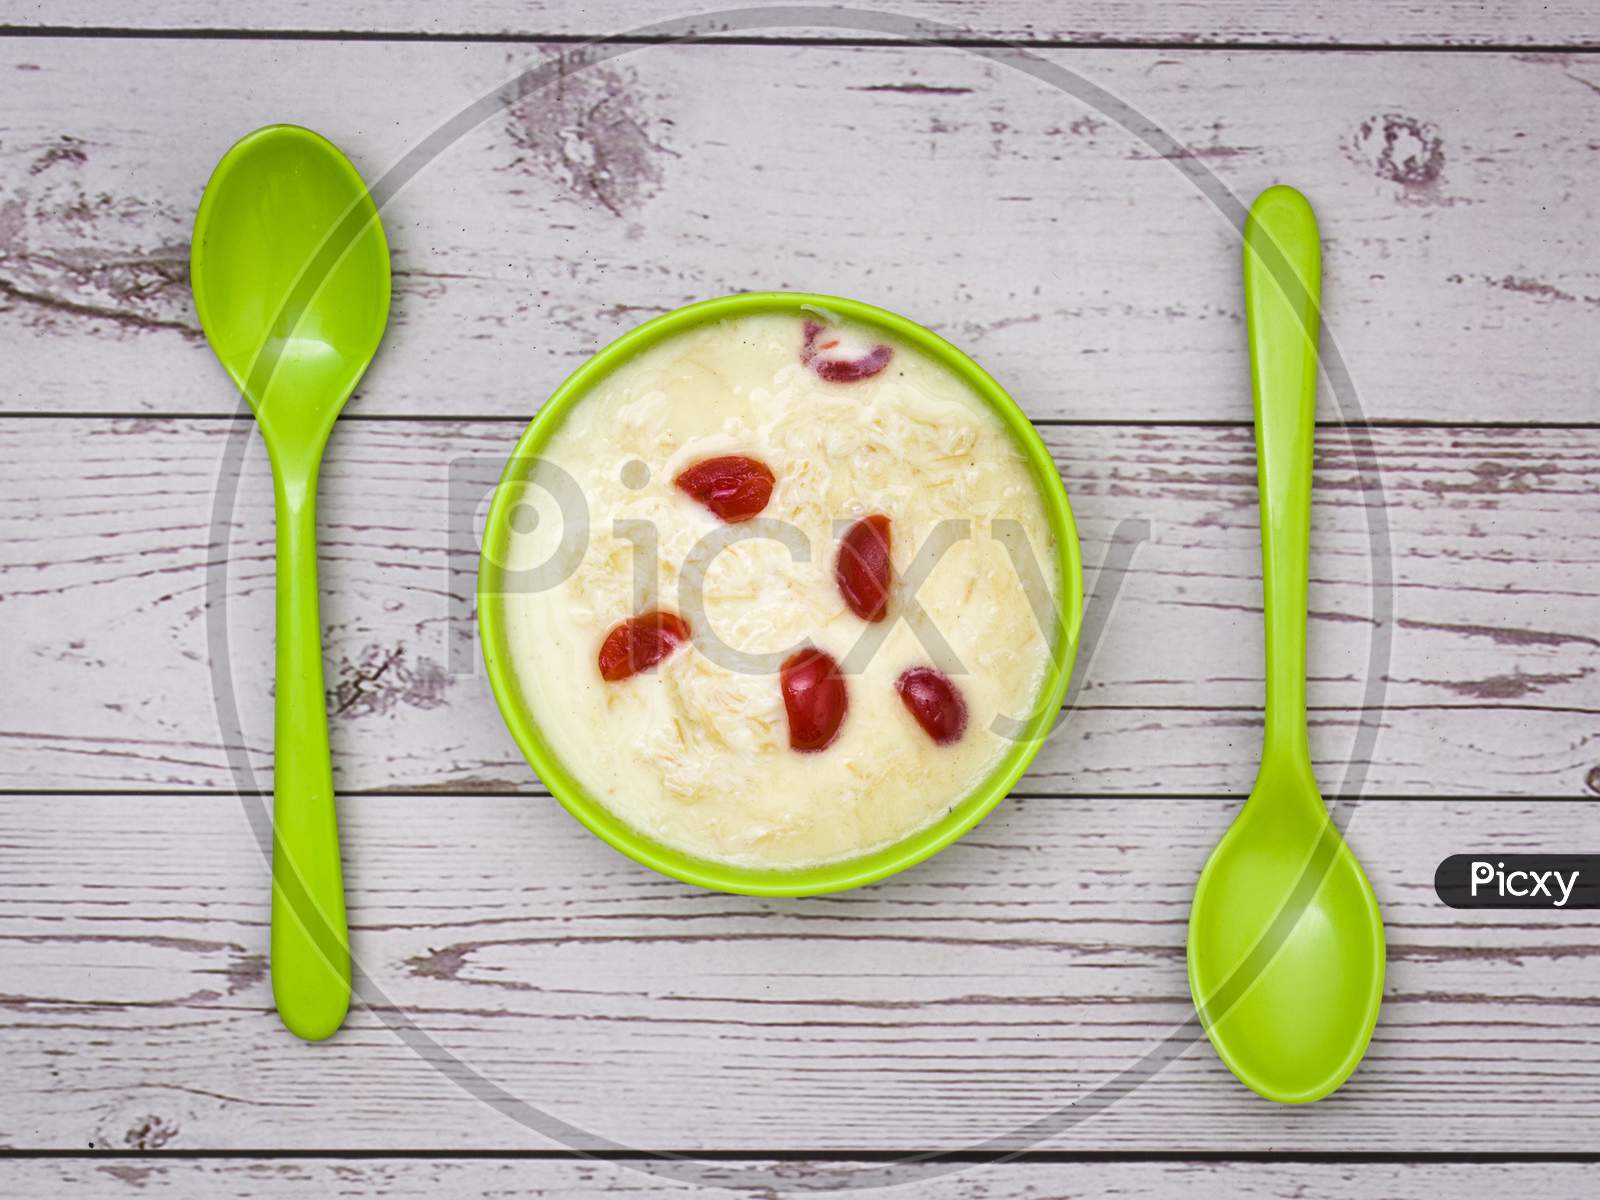 Sewai or kheer consumed on eid or indian festivals. Served with red cherry toppings in a green bowl.